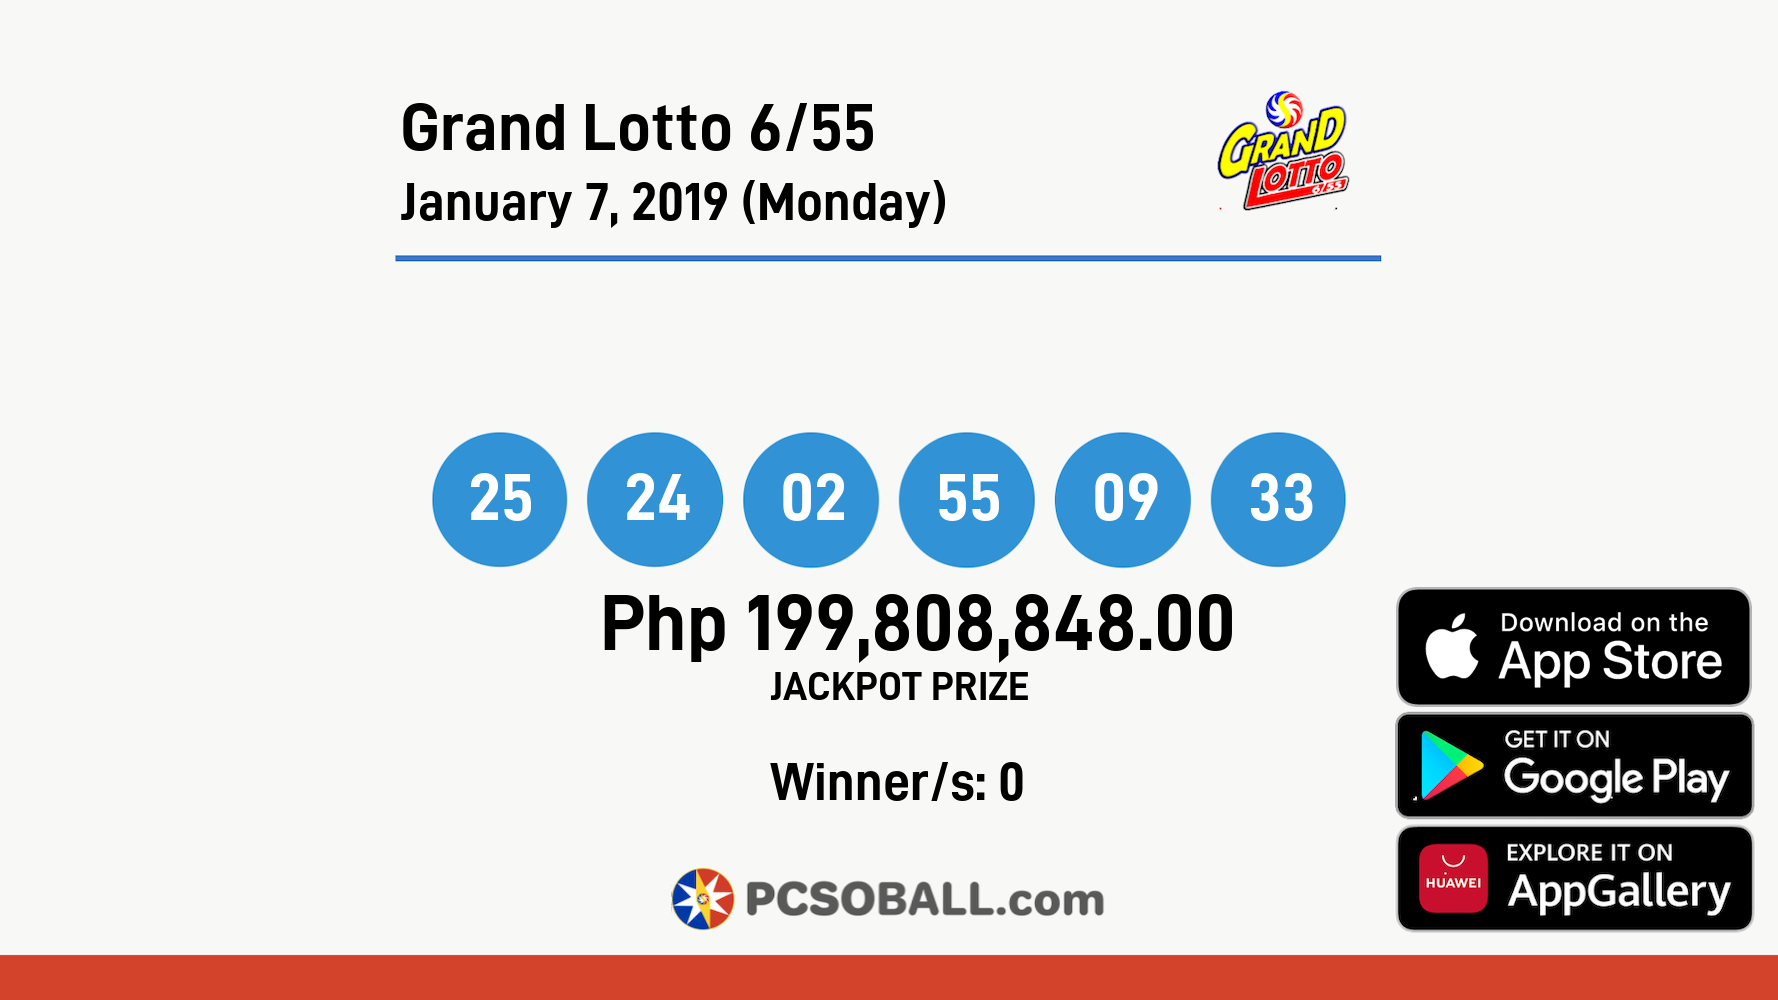 Grand Lotto 6/55 January 7, 2019 (Monday) Result